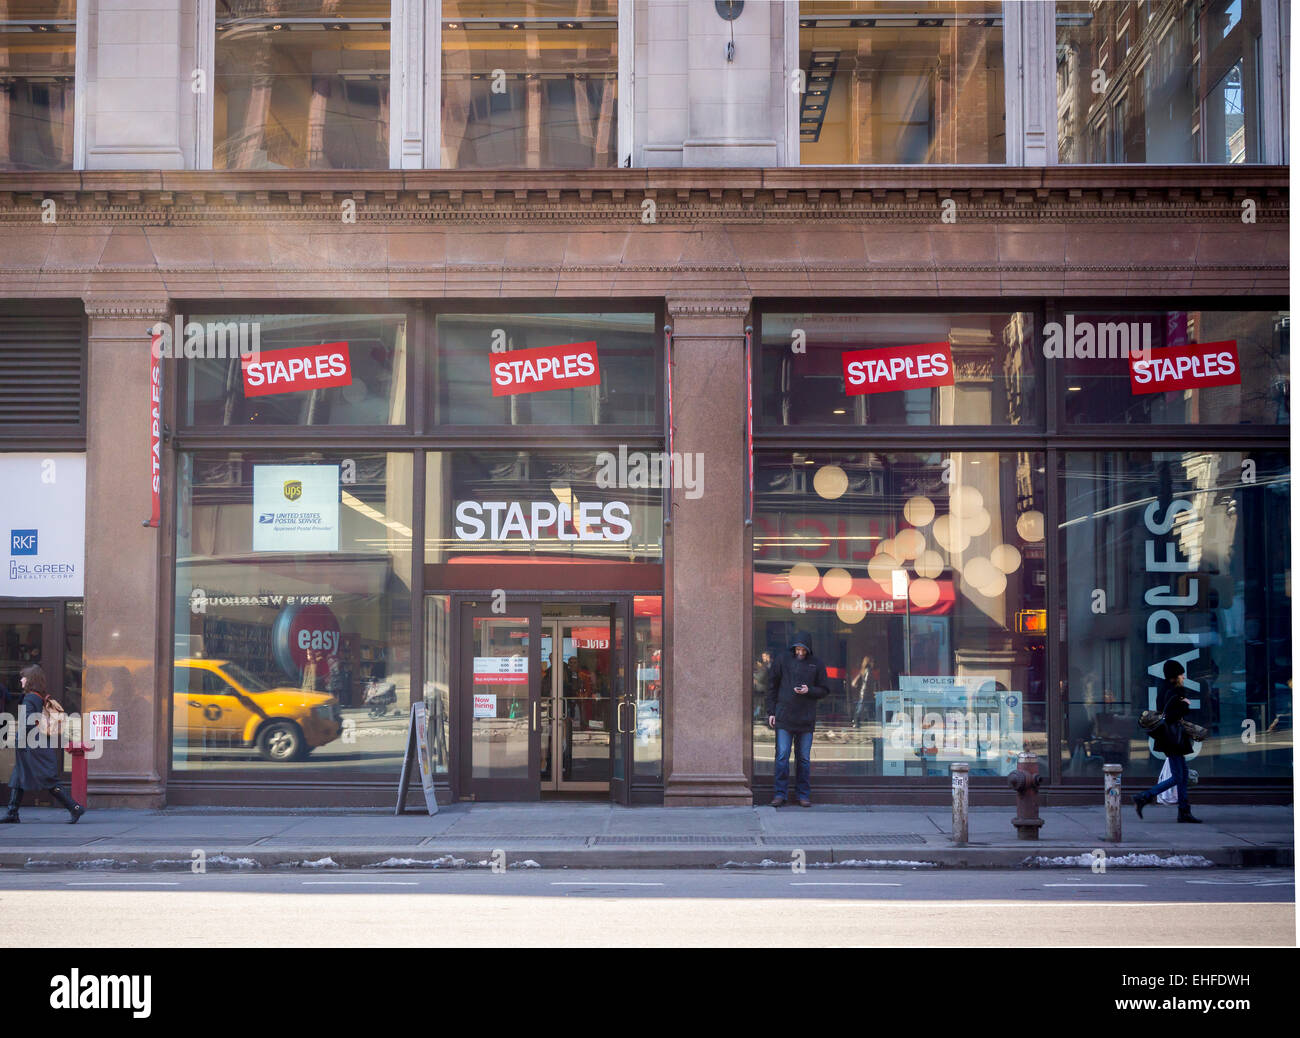 A Staples Office Supply Store In New York On Monday March 2 2015 Staples EHFDWH 